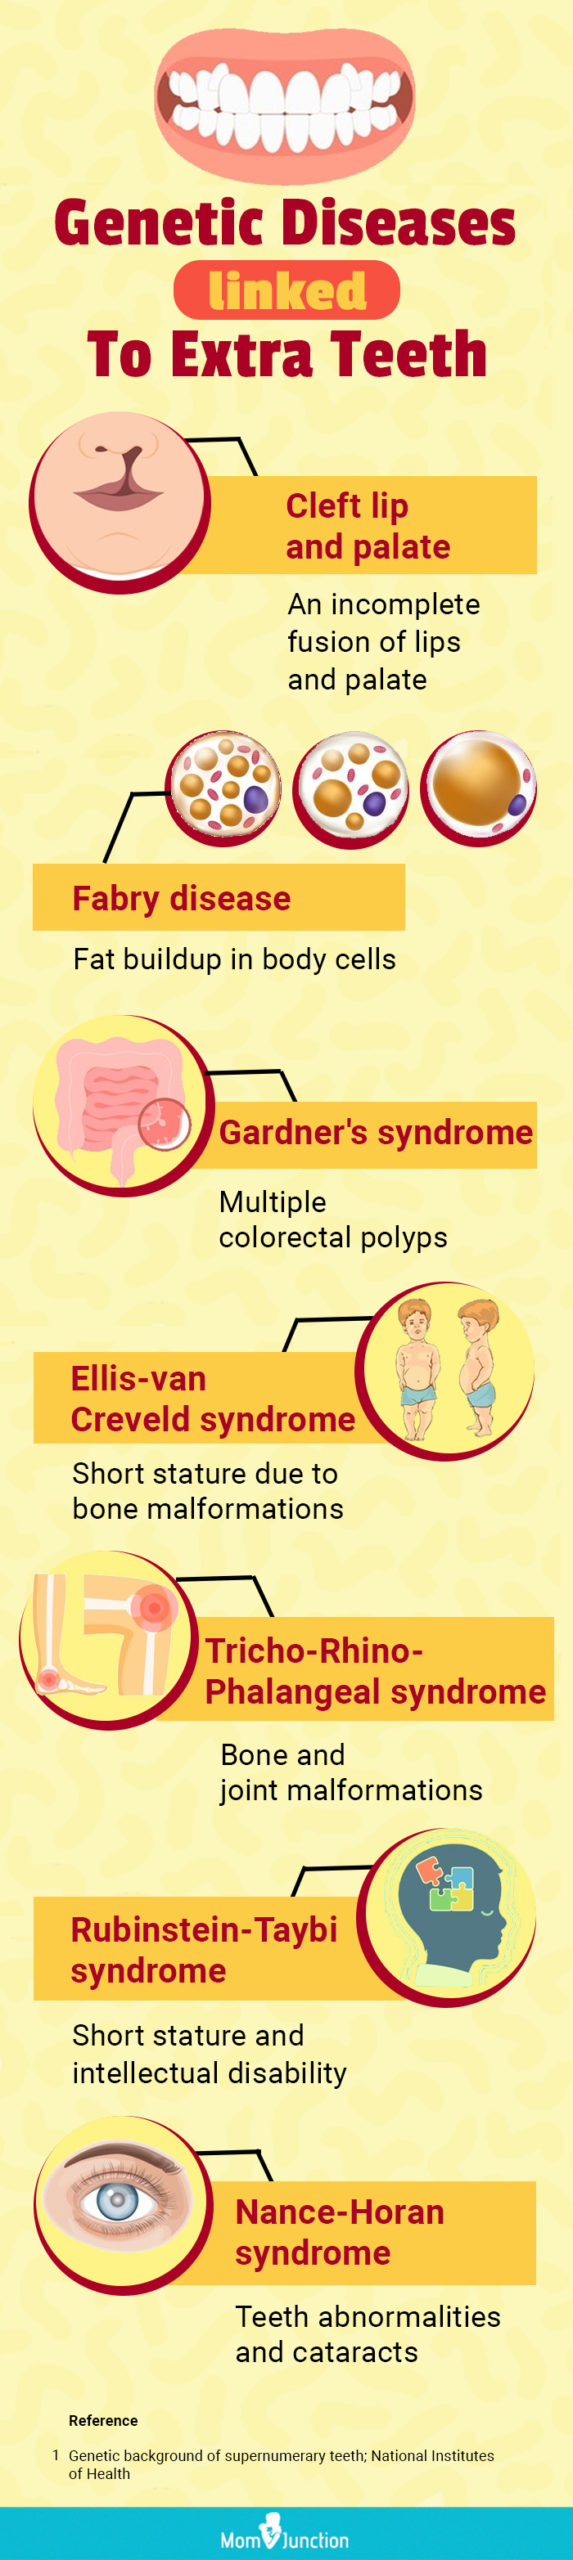 genetic diseases linked to extra teeth (infographic)